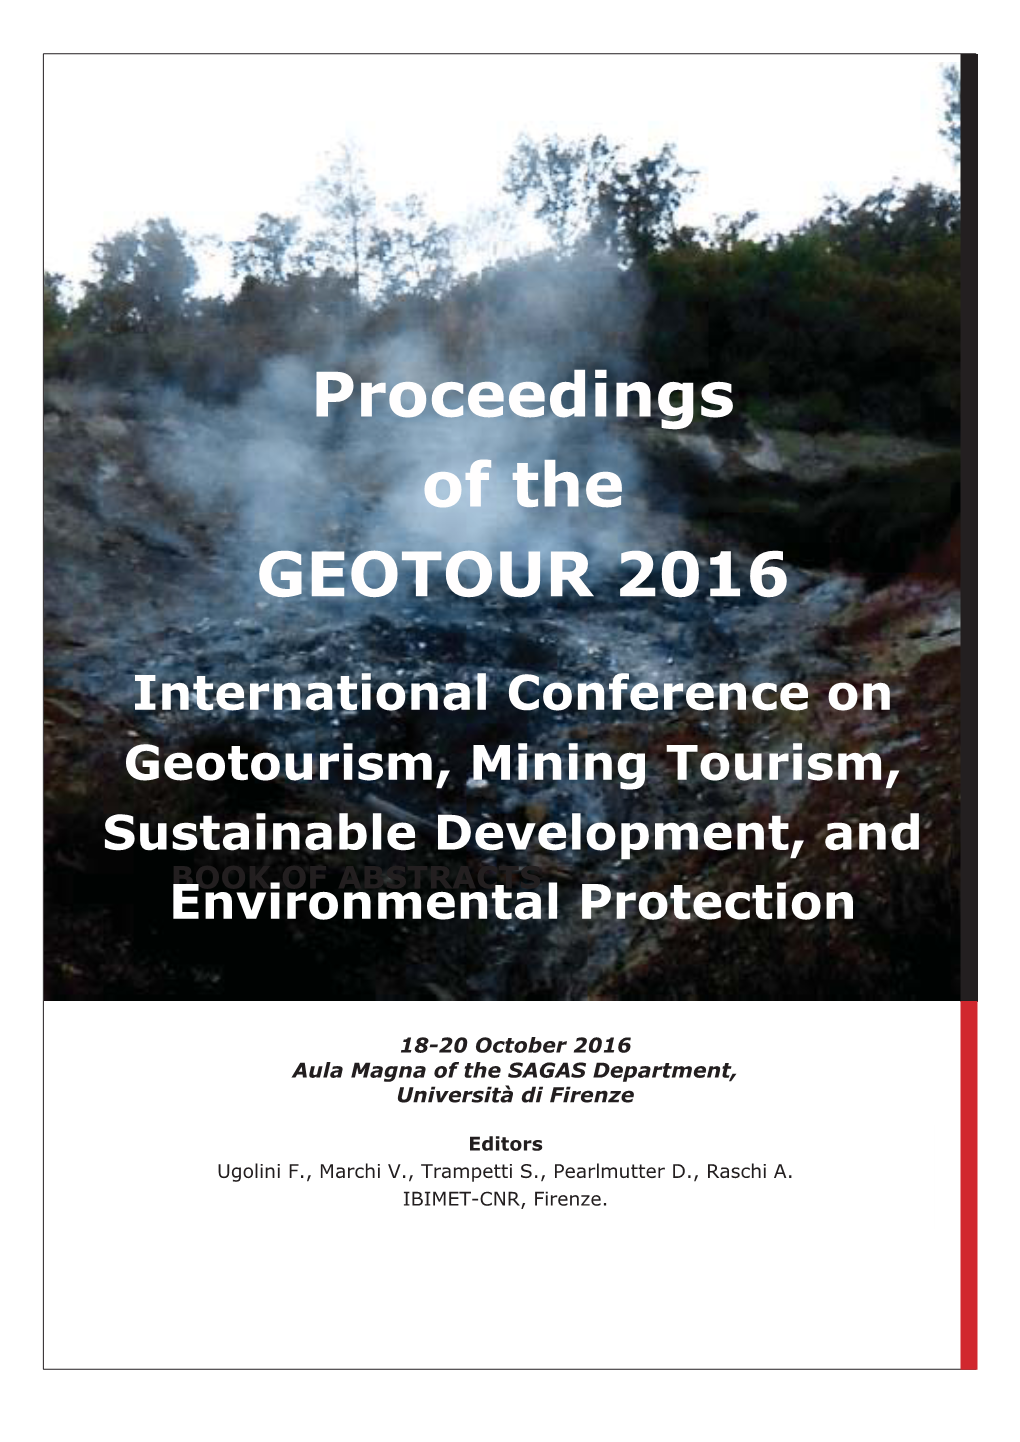 BOOK of ABSTRACTS International Conference on Geotourism, Mining